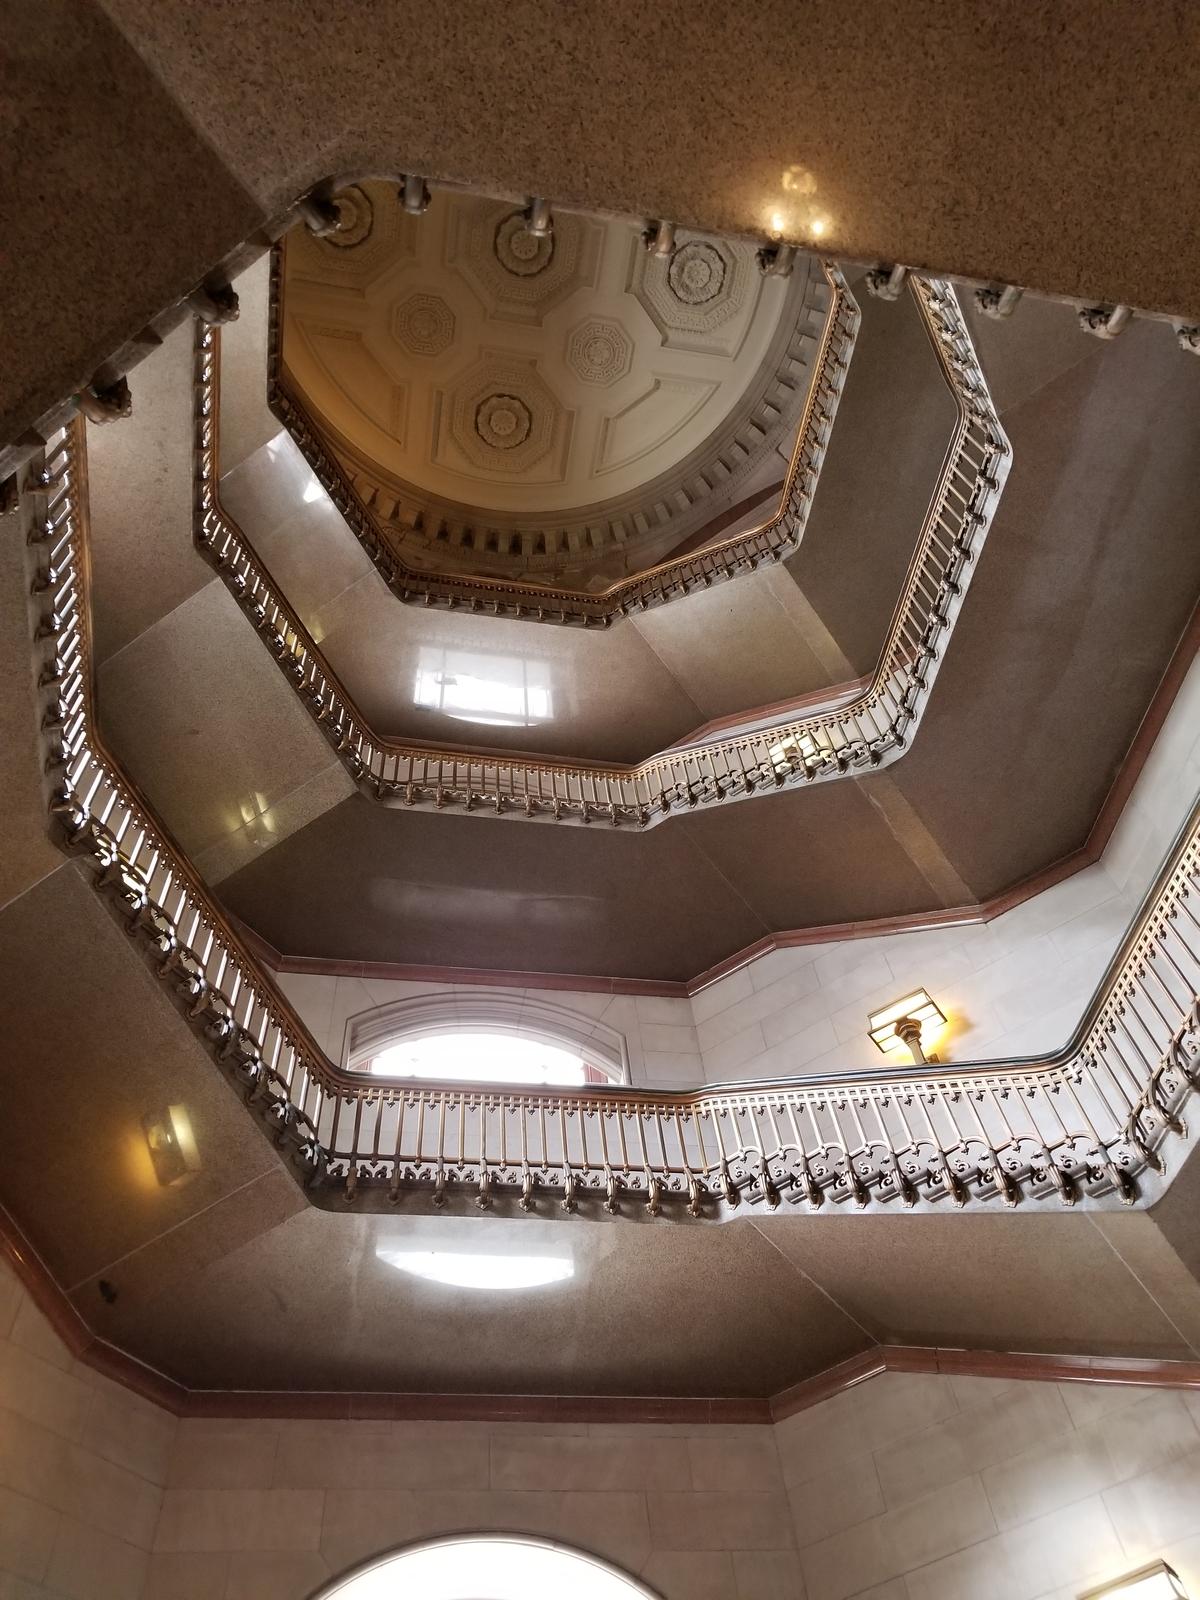 One of the staircases in the north and south portals. The grand scale is felt upon looking up at the coffered ceiling, seven stories above the ground. (Antigng/CC BY-SA 4.0)